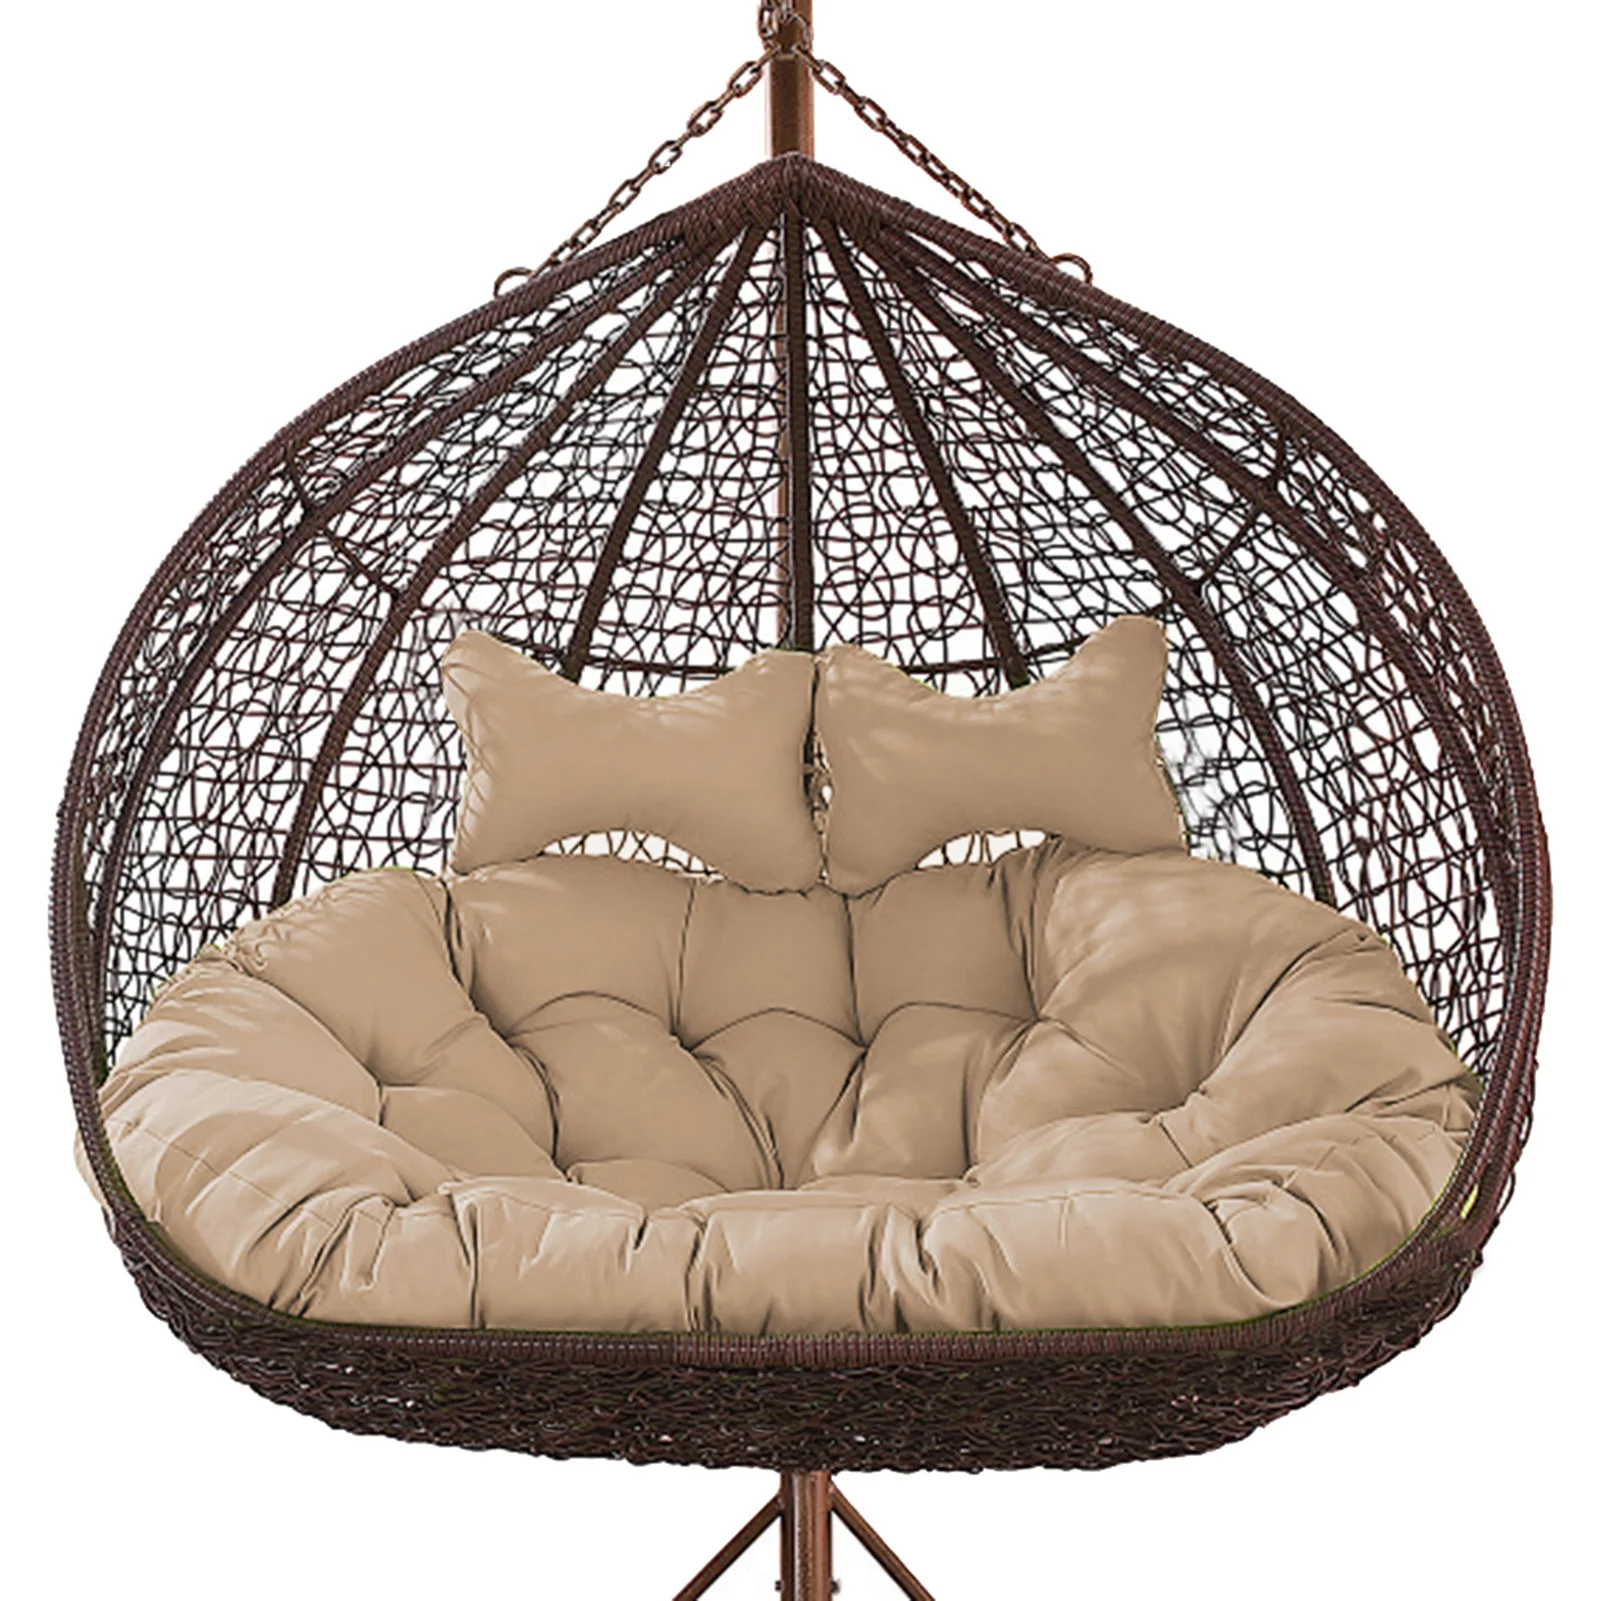 MonthYue Hanging Basket Chair Cushion Wicker Rattan Hanging Egg Chair Pads Detachable with Pillow Thick Nest Hanging Chairs Back,Brown 